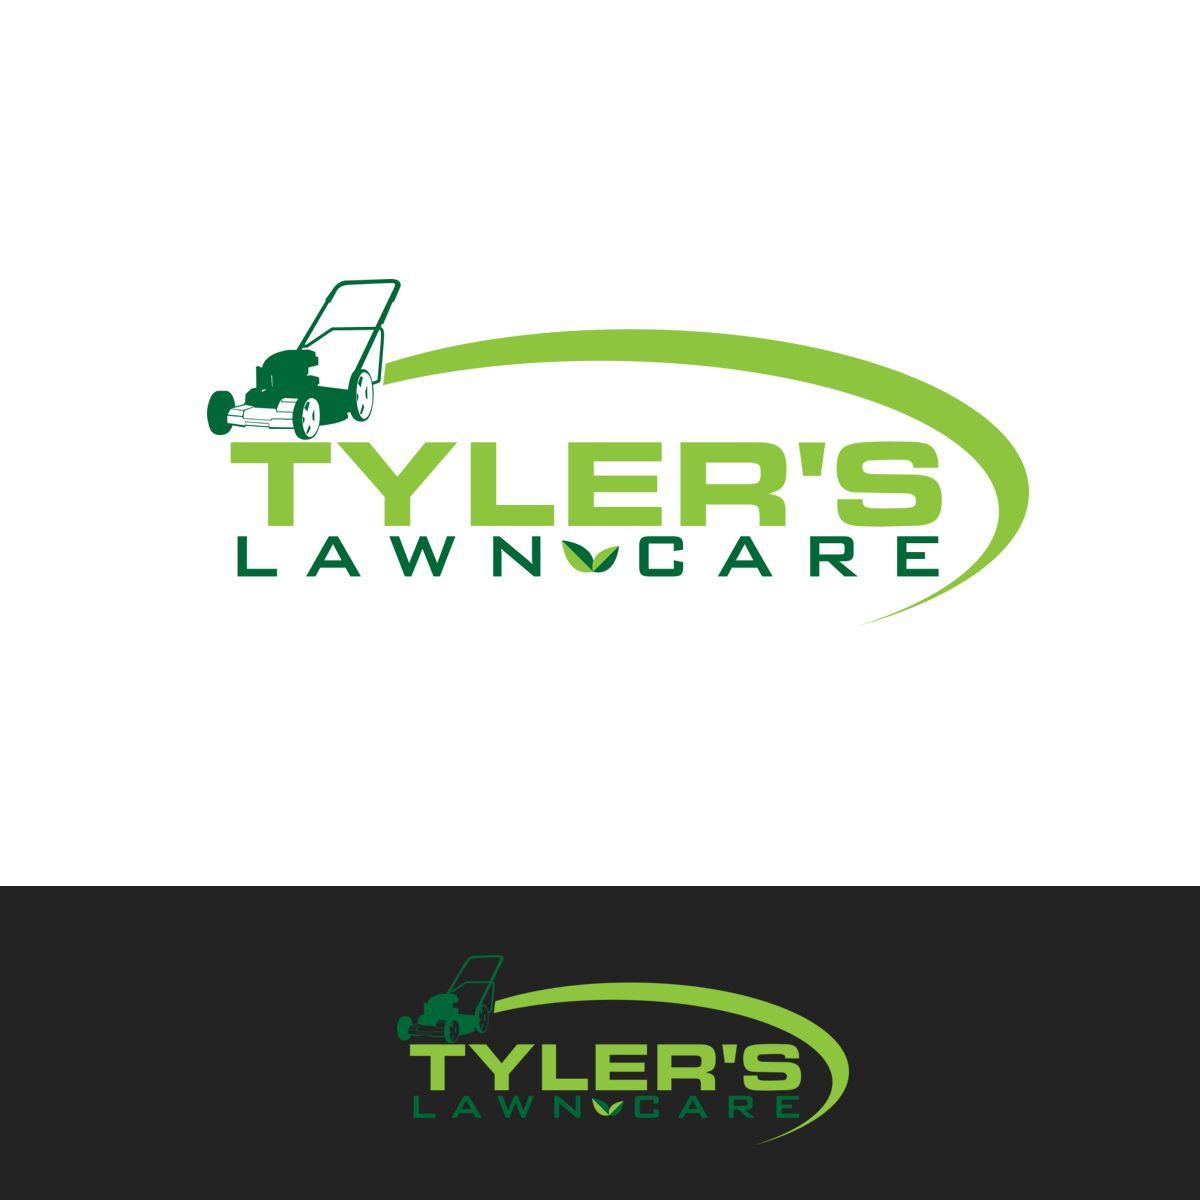 Lawn Care Logo - Modern, Professional, Lawn Care Logo Design for Tyler's Lawn Care by ...